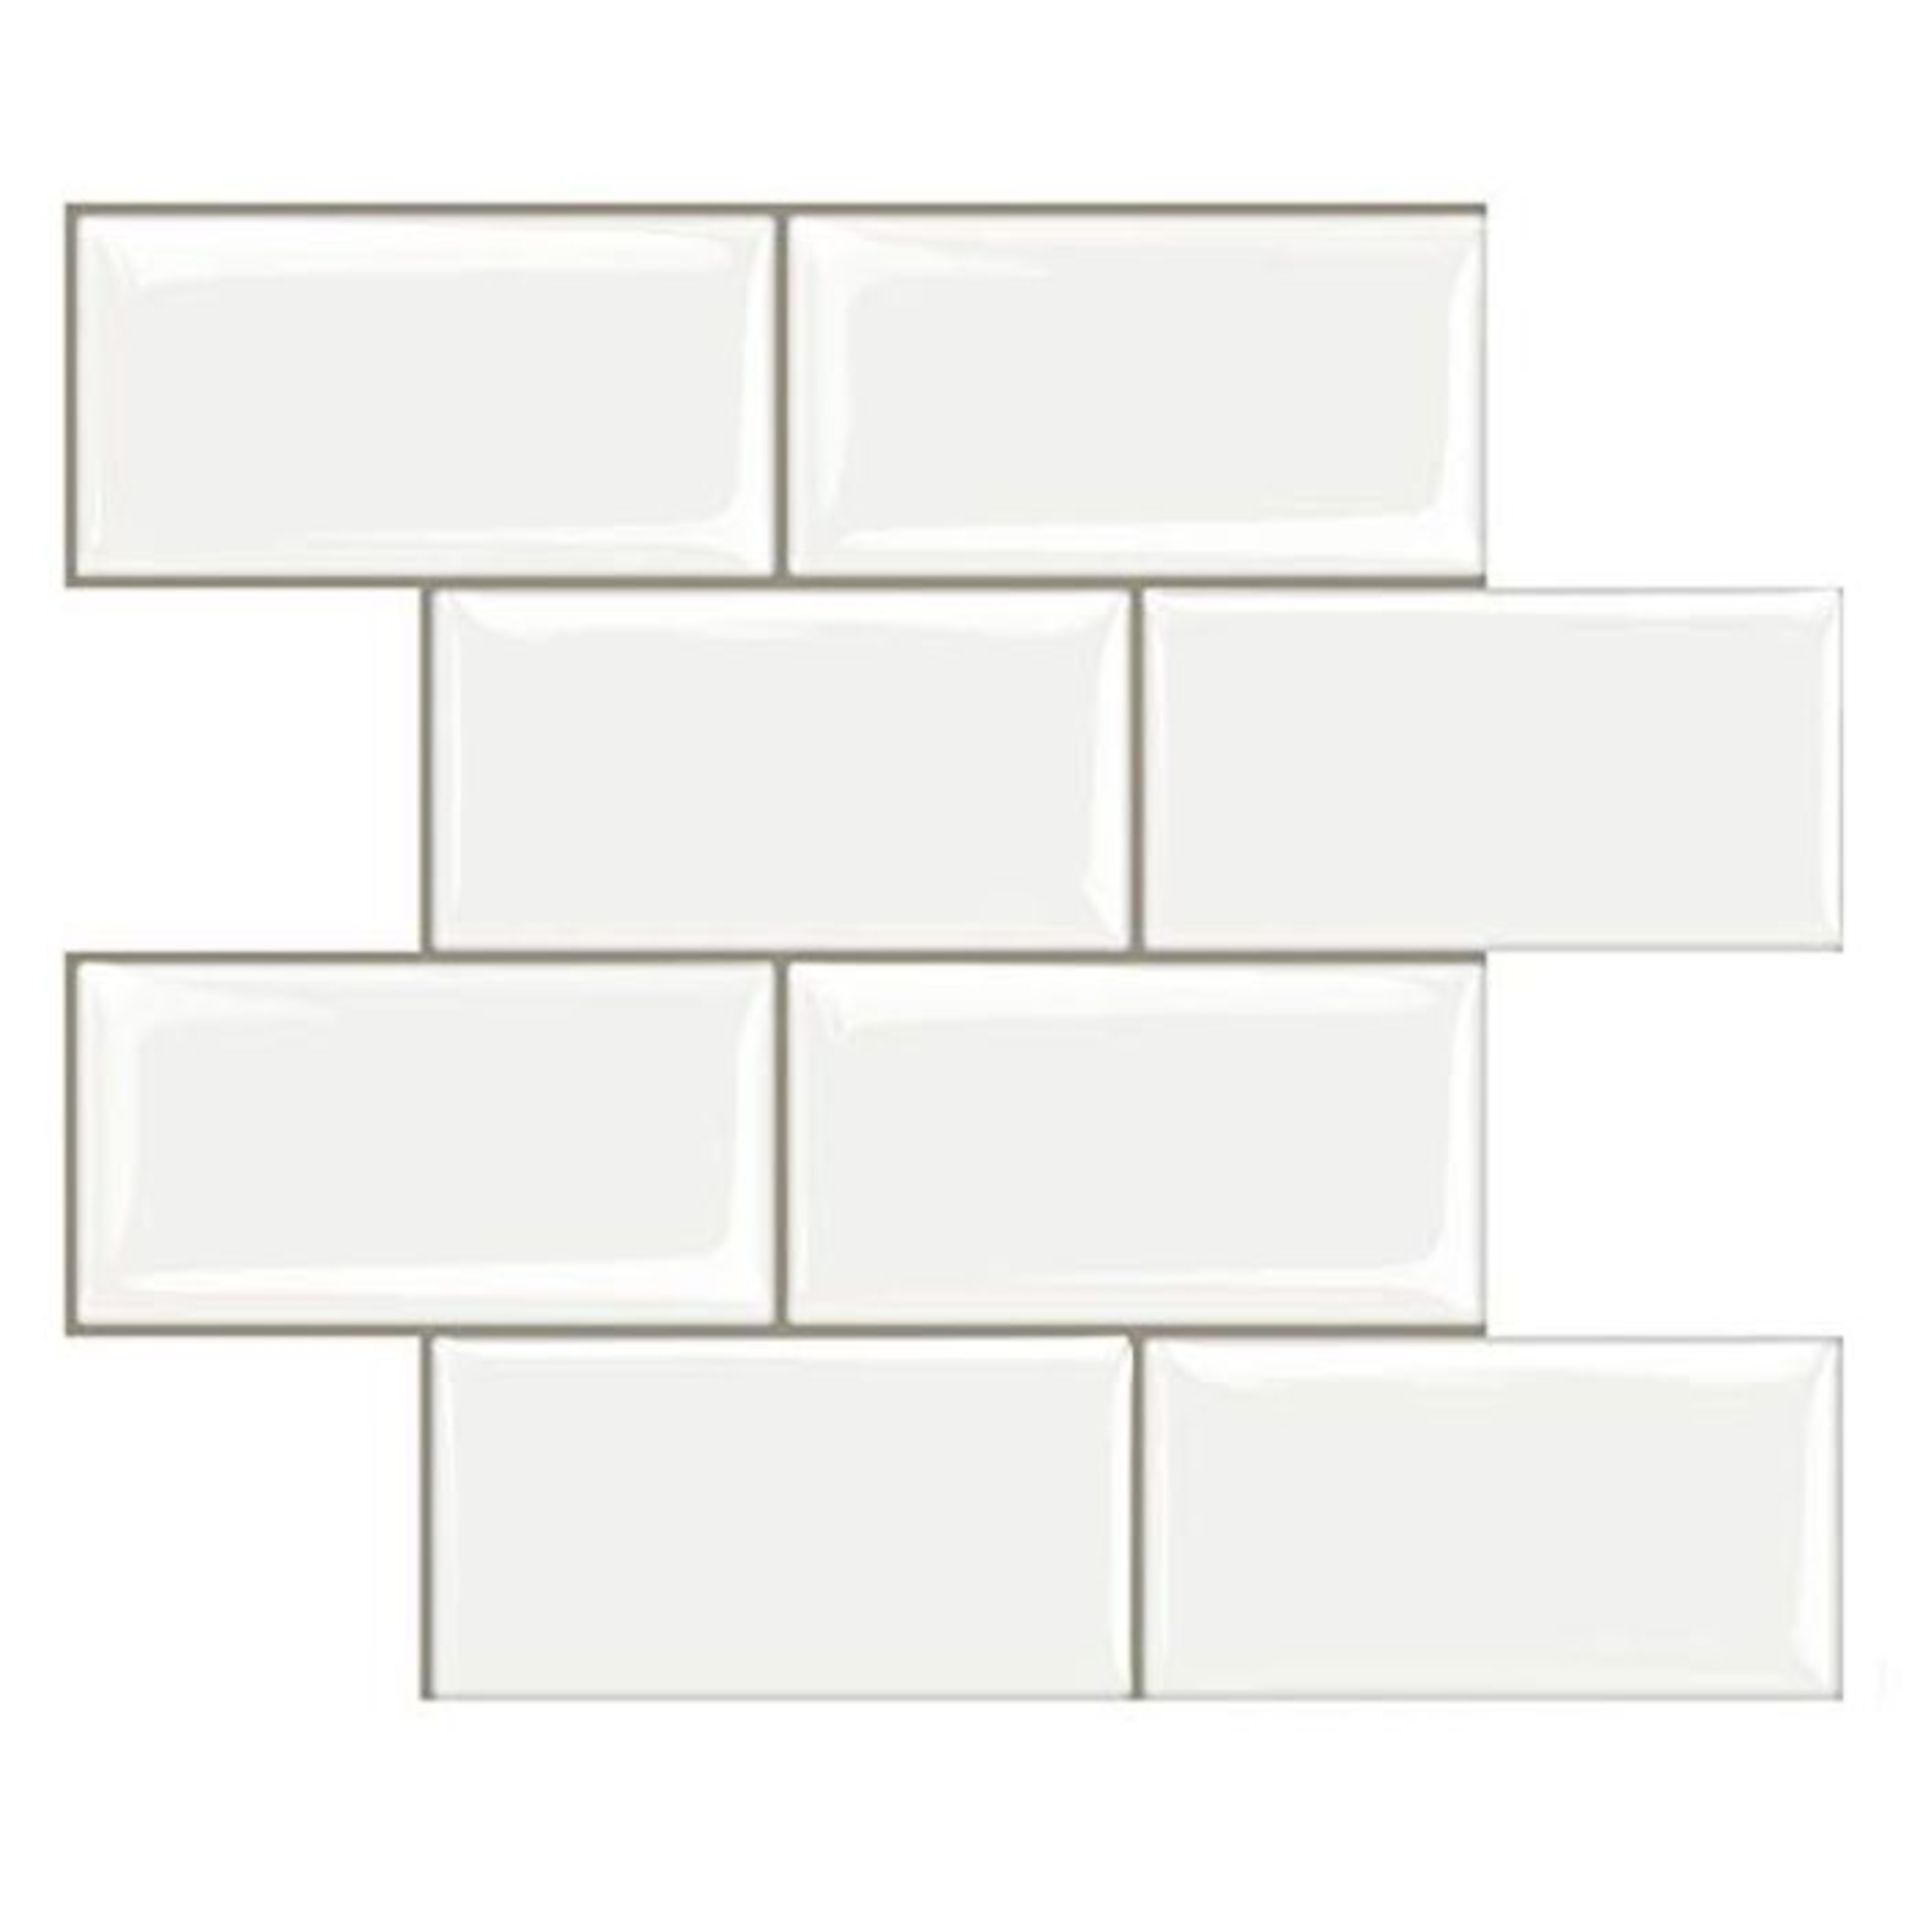 STICKGOO 10-Sheet Peel and Stick Subway Tile Stickers, 12"x12" Self Adhesive Wall Tile